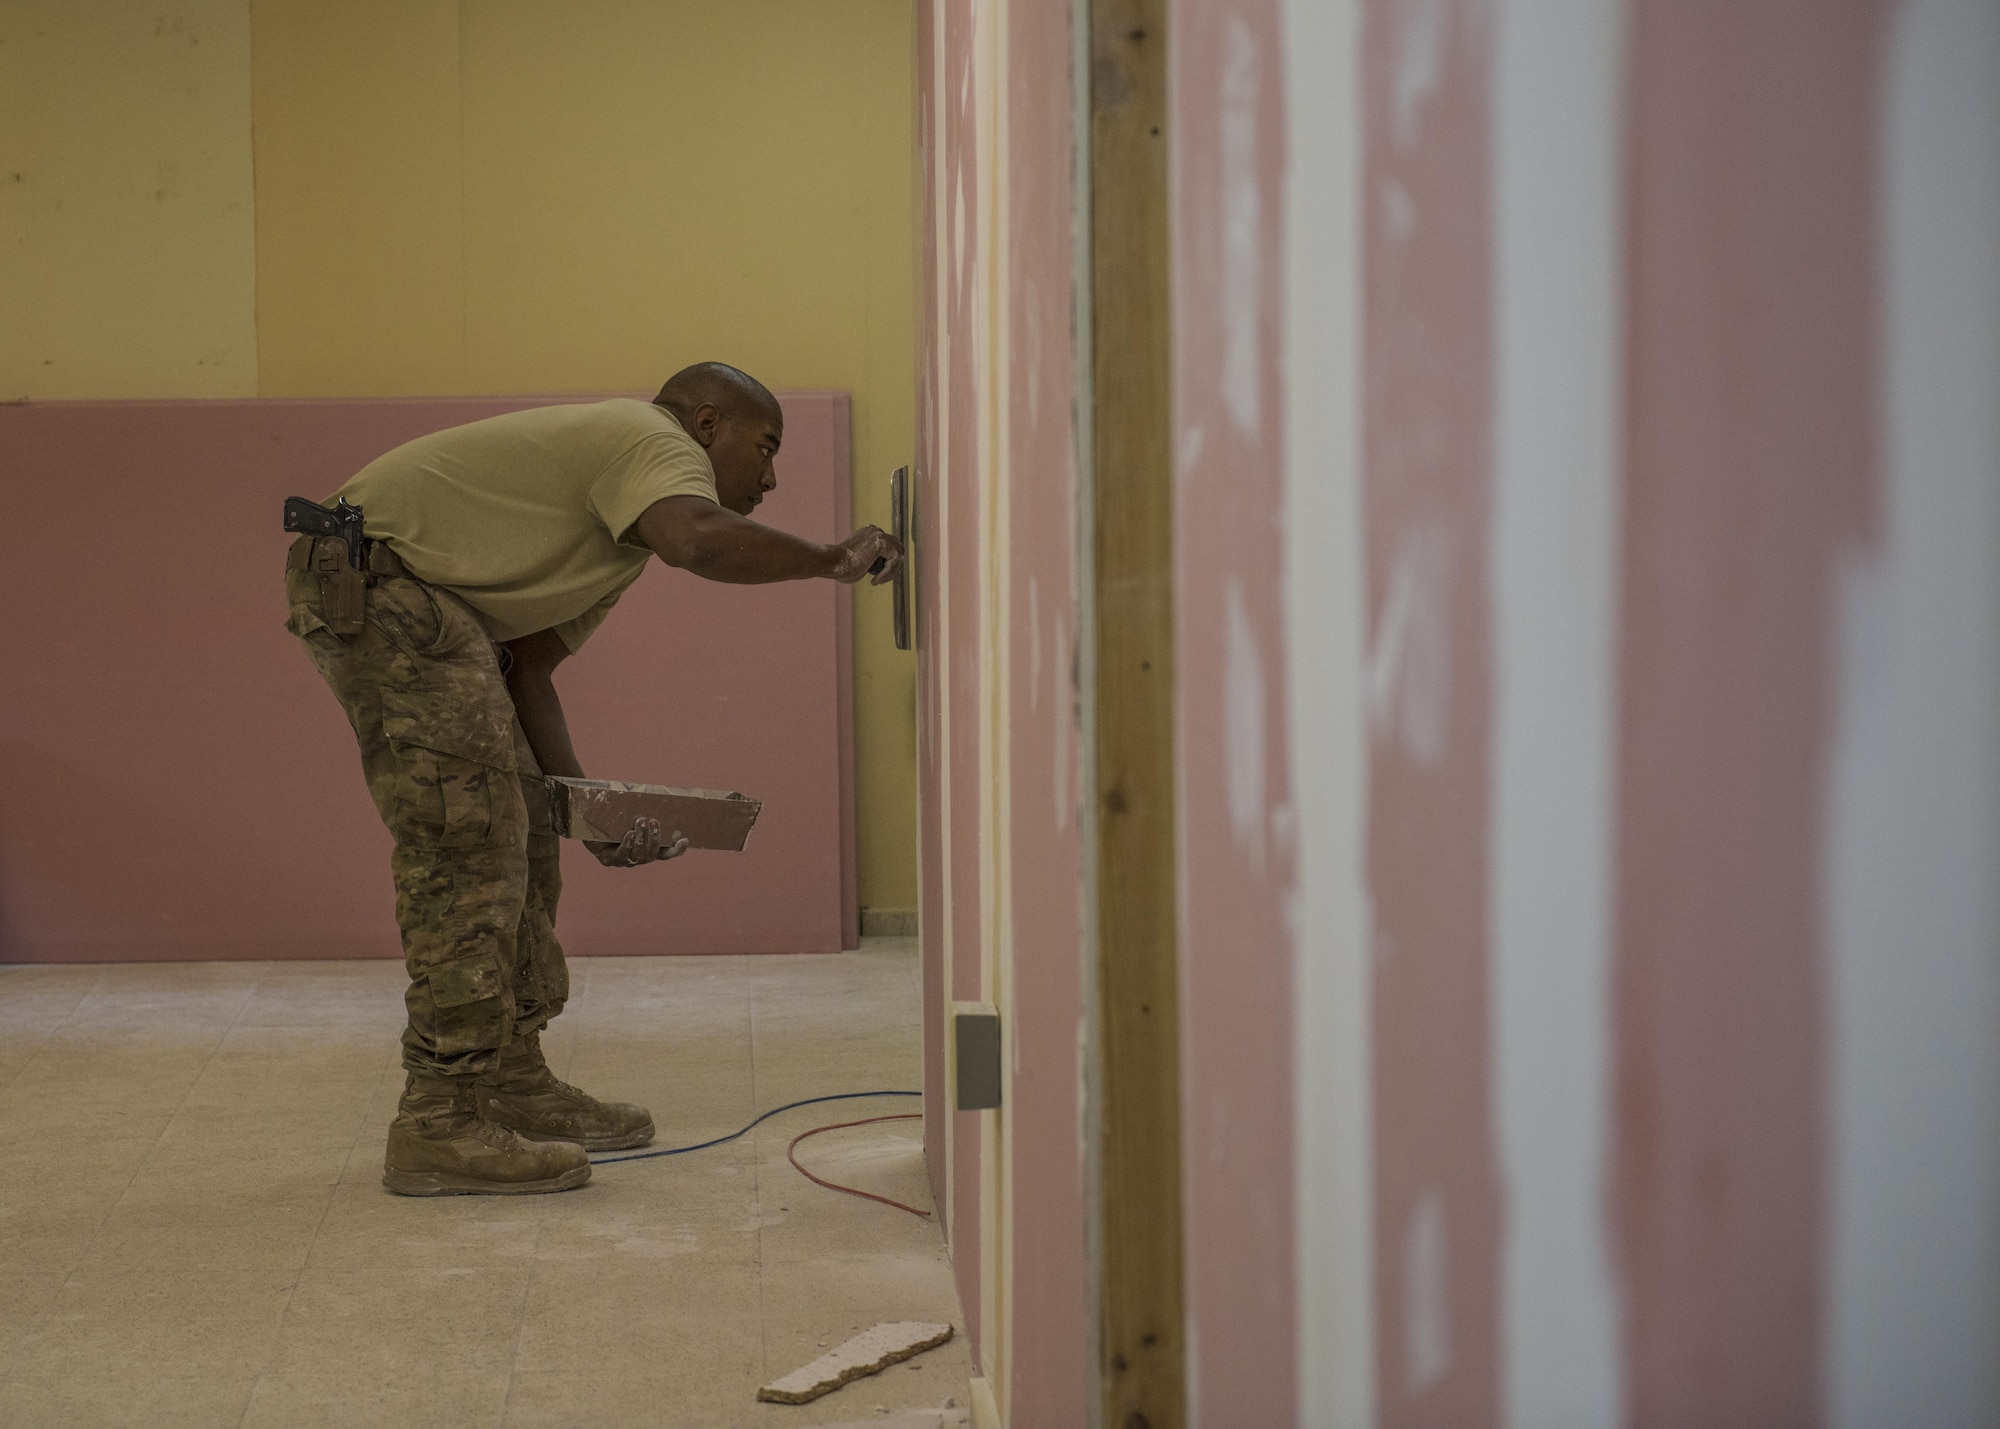 Staff Sgt. Donald Scott, 455th Expeditionary Civil Engineer Squadron structures, applies joint compound which helps seal joints between drywall, Bagram Airfield, Afghanistan, Sept. 20, 2016. The structures team paired with the 455th ECS to renovate and provide communications for the building. (U.S. Air Force photo by Senior Airman Justyn M. Freeman)